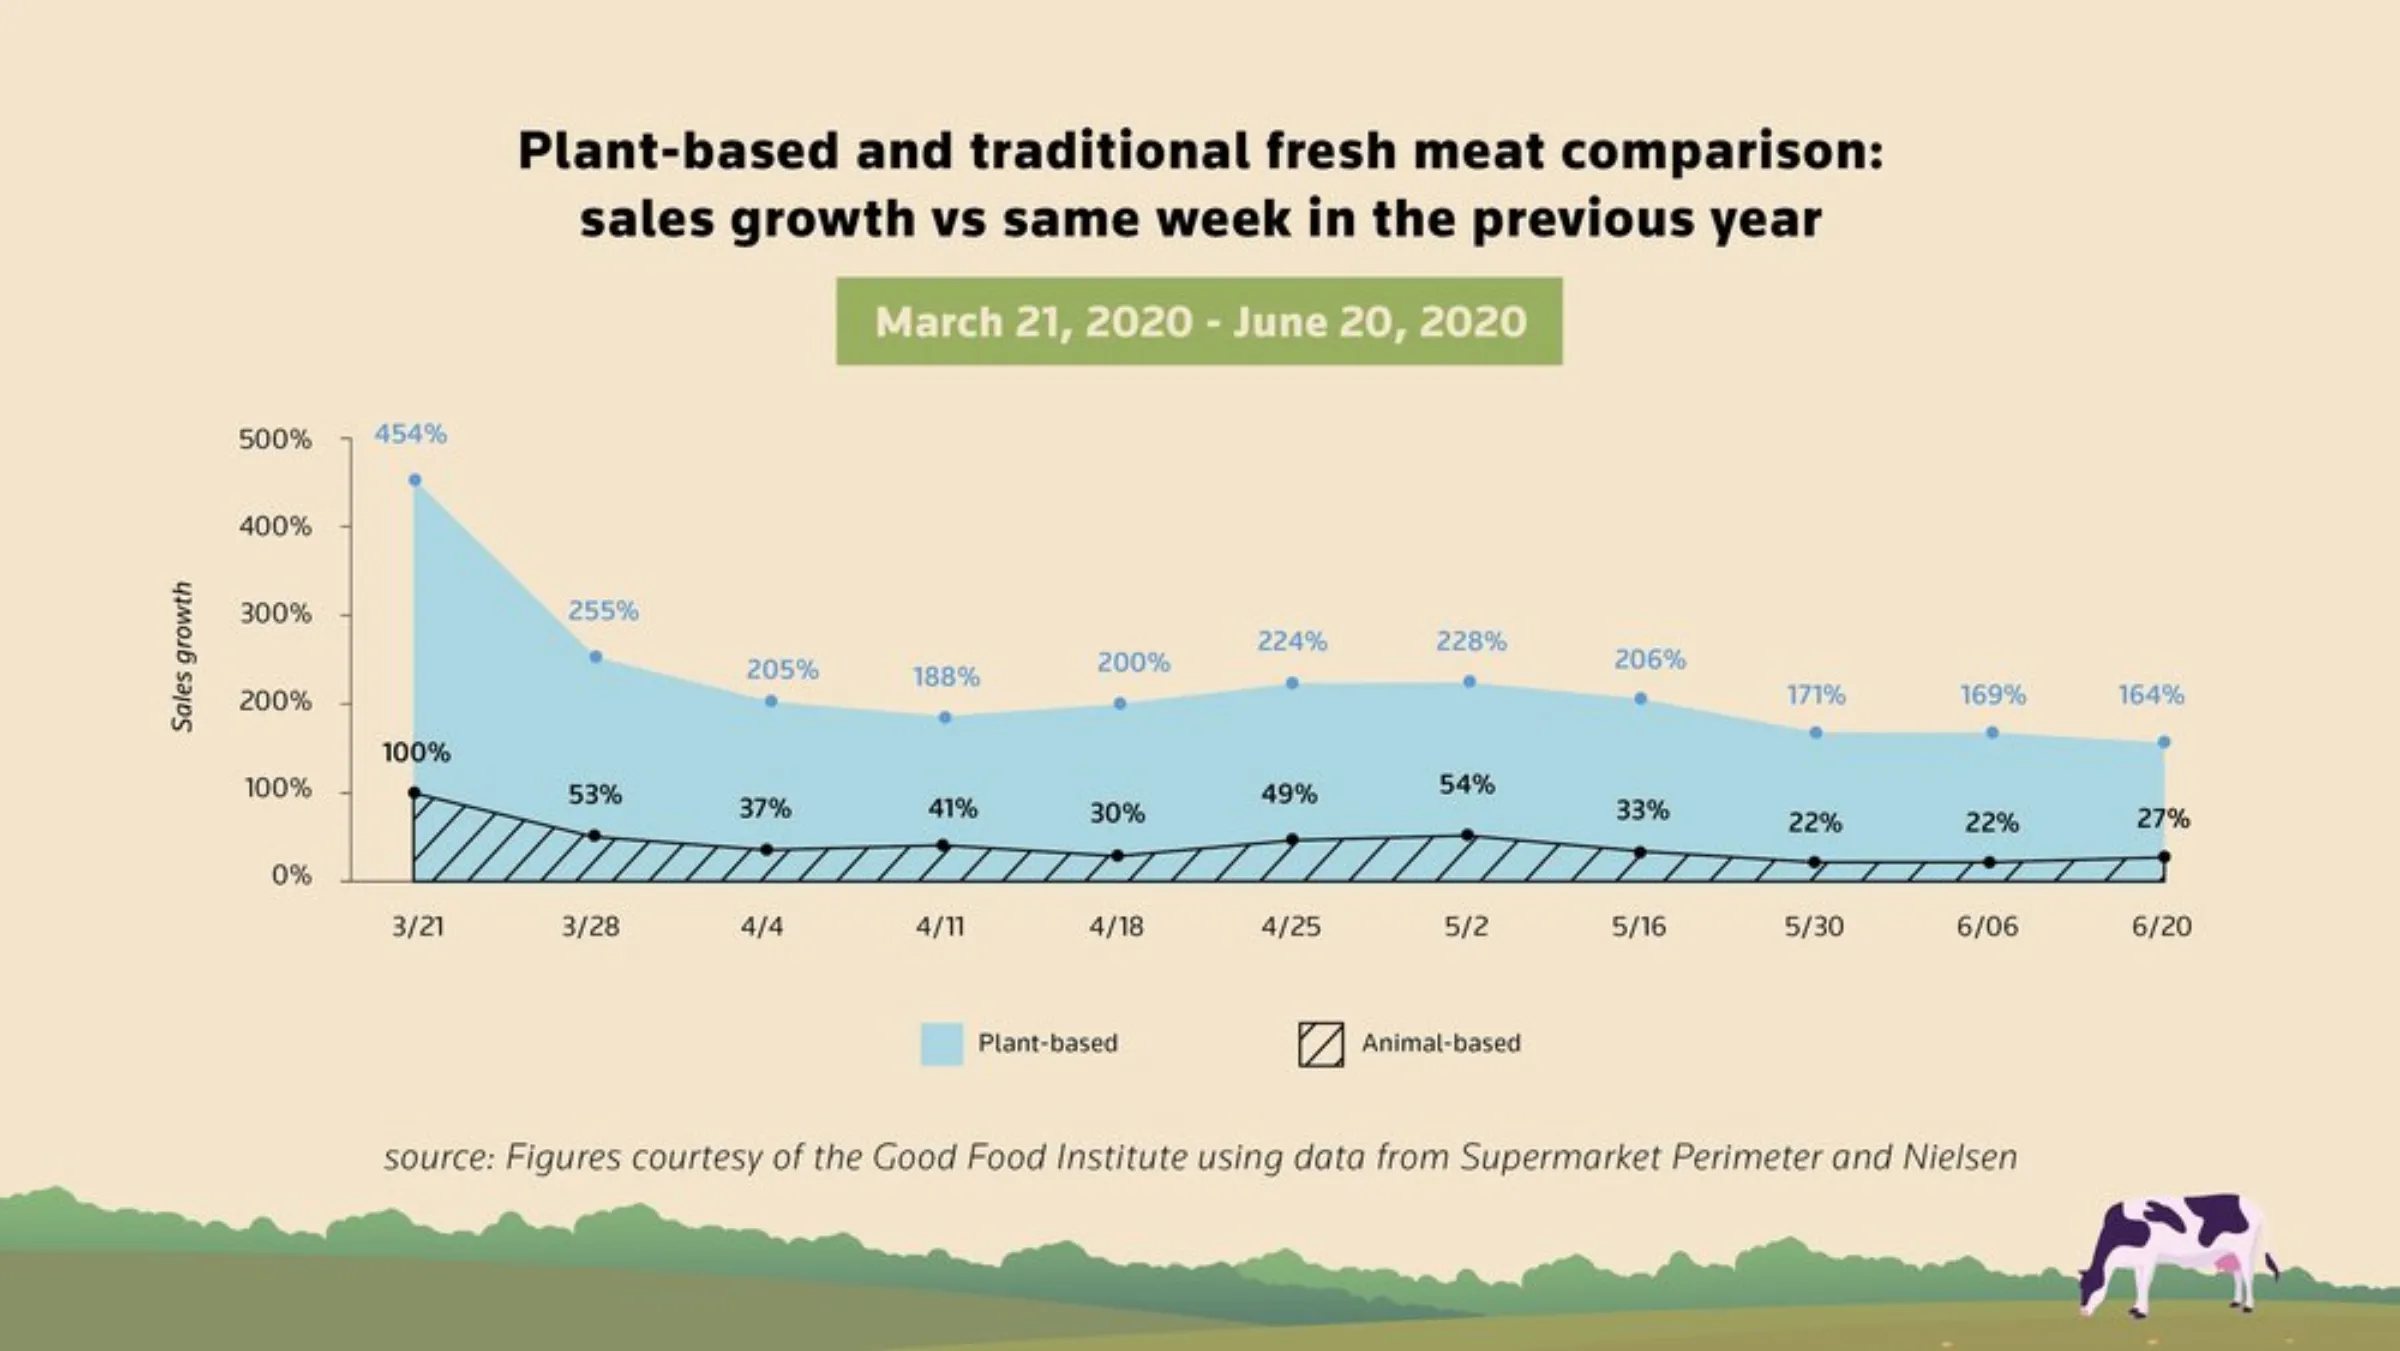 Graph of plant-based and traditional fresh meat comparison: sales growth vs same week in the previous year, March 2020 - June 2020